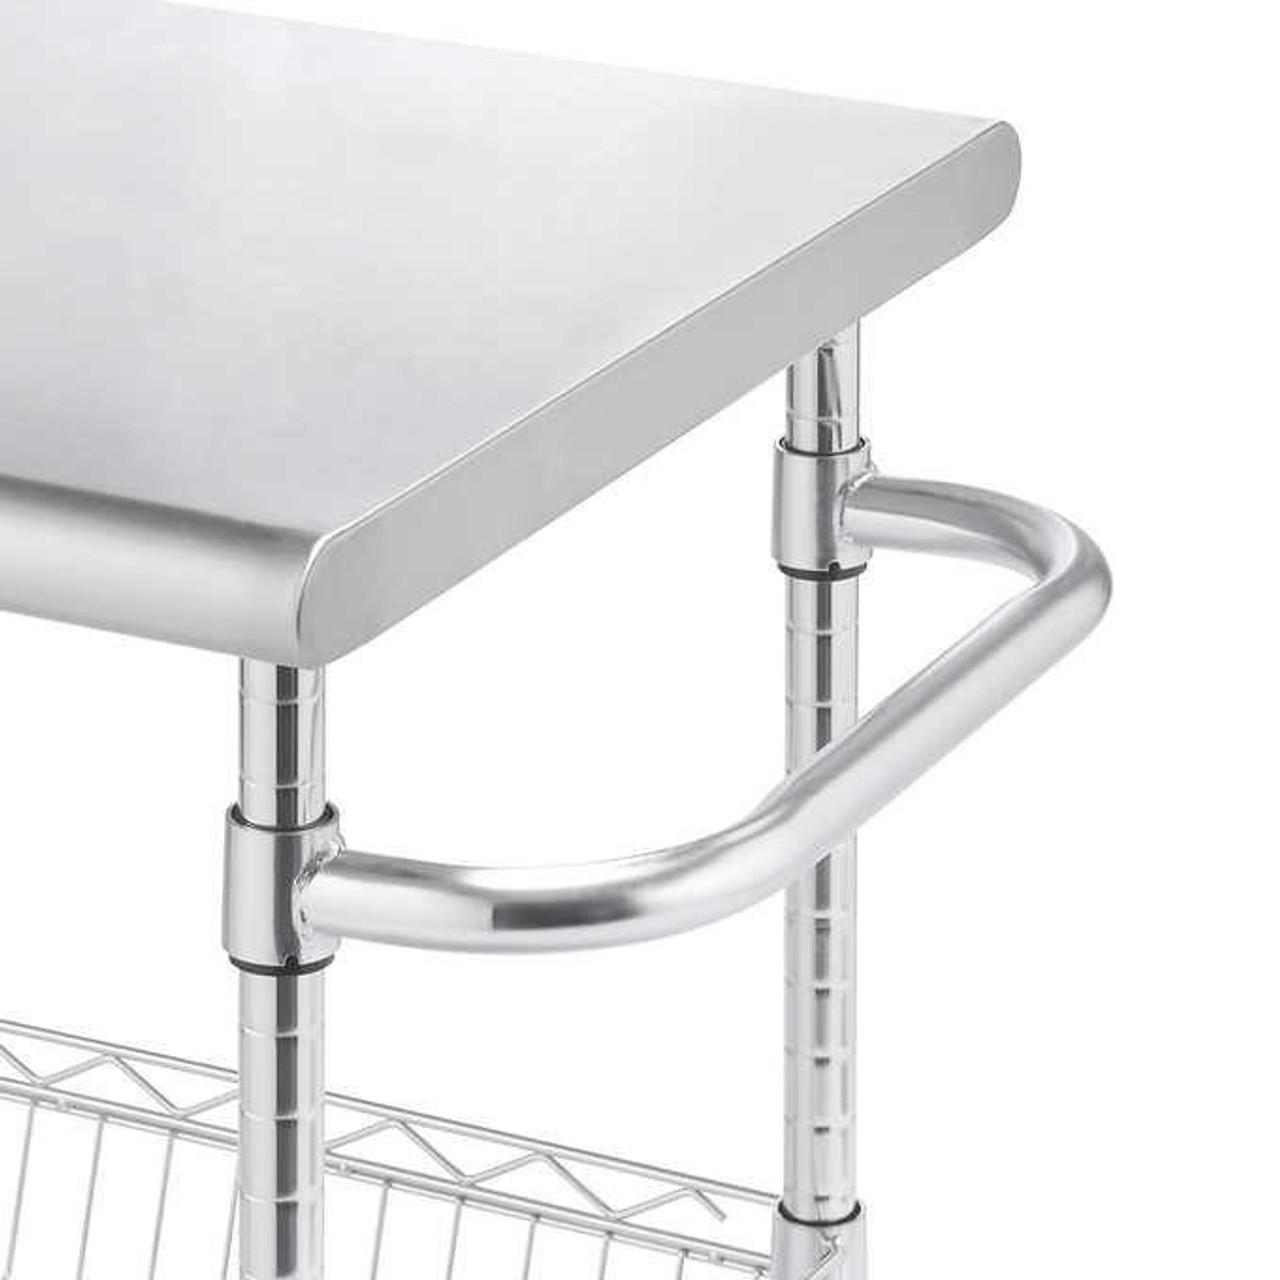 trinity Trinity Adjustable Features Stainless Steel Kitchen Cart 60.96cm(24in) 